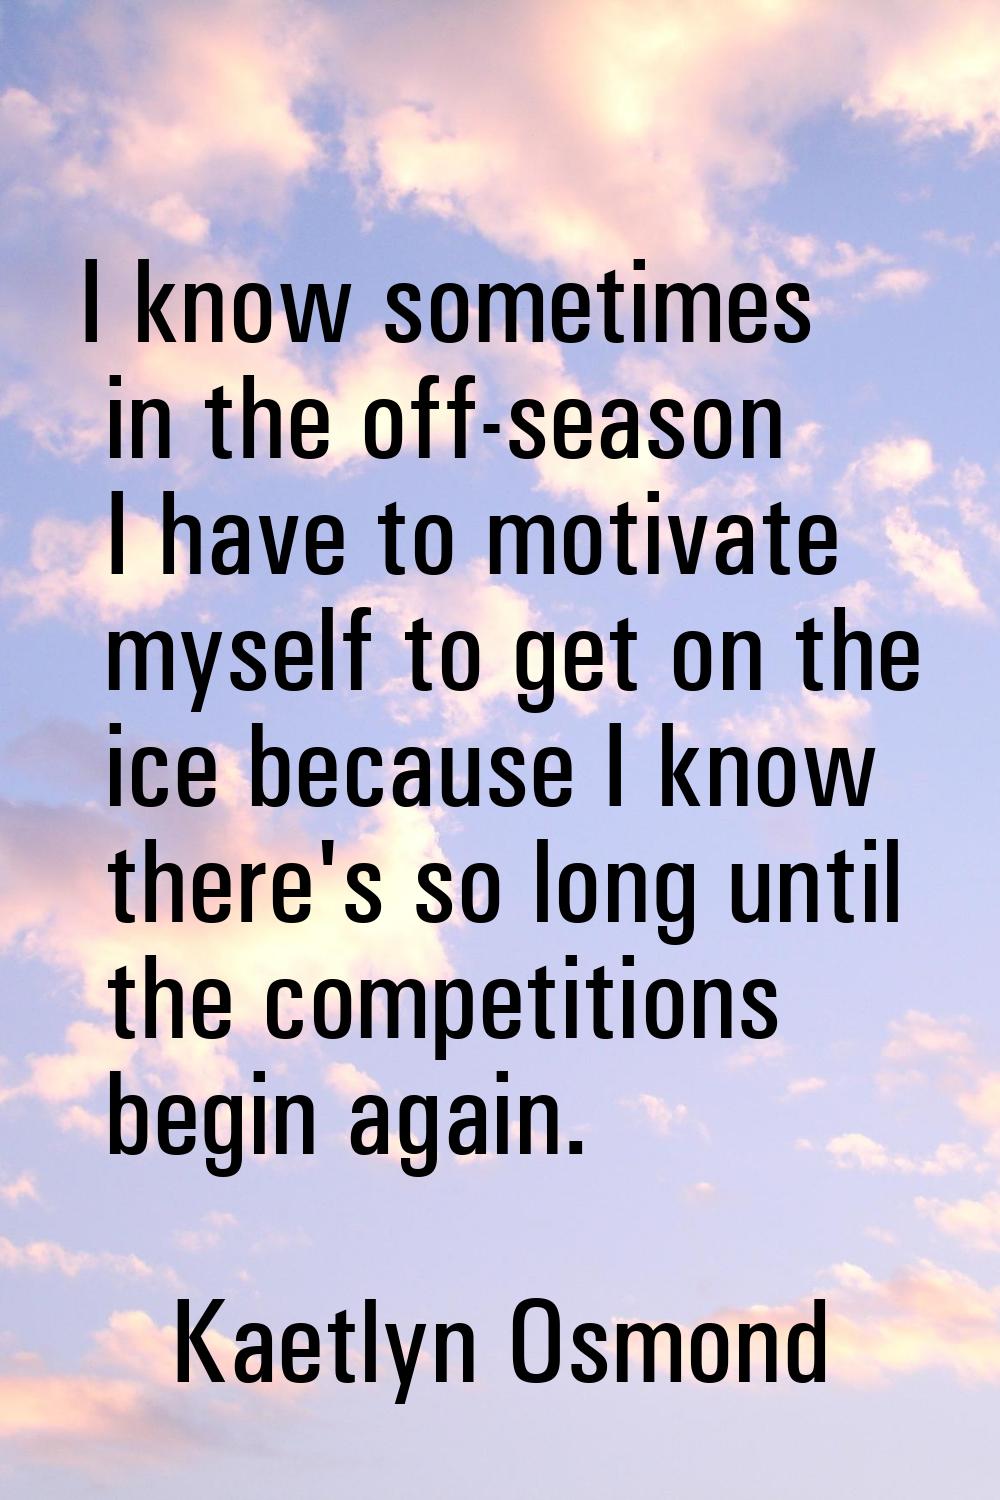 I know sometimes in the off-season I have to motivate myself to get on the ice because I know there